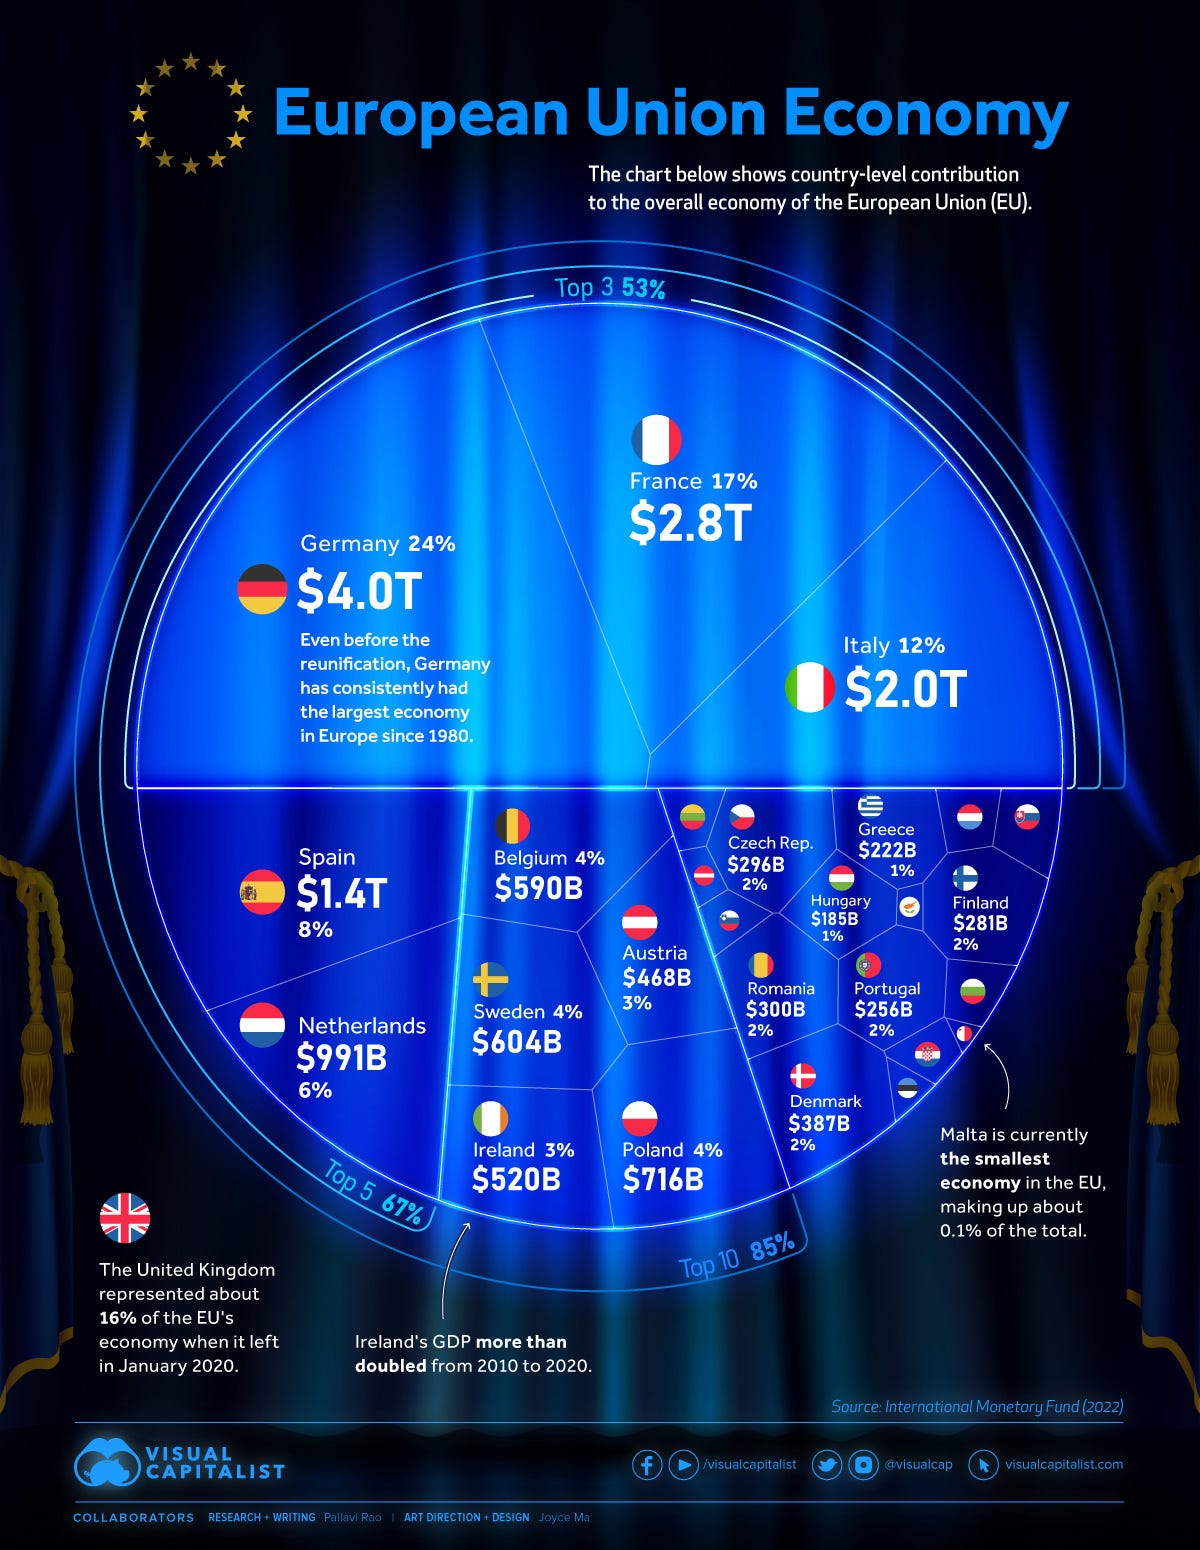 Chart showing a breakdown of the European Union economy by country